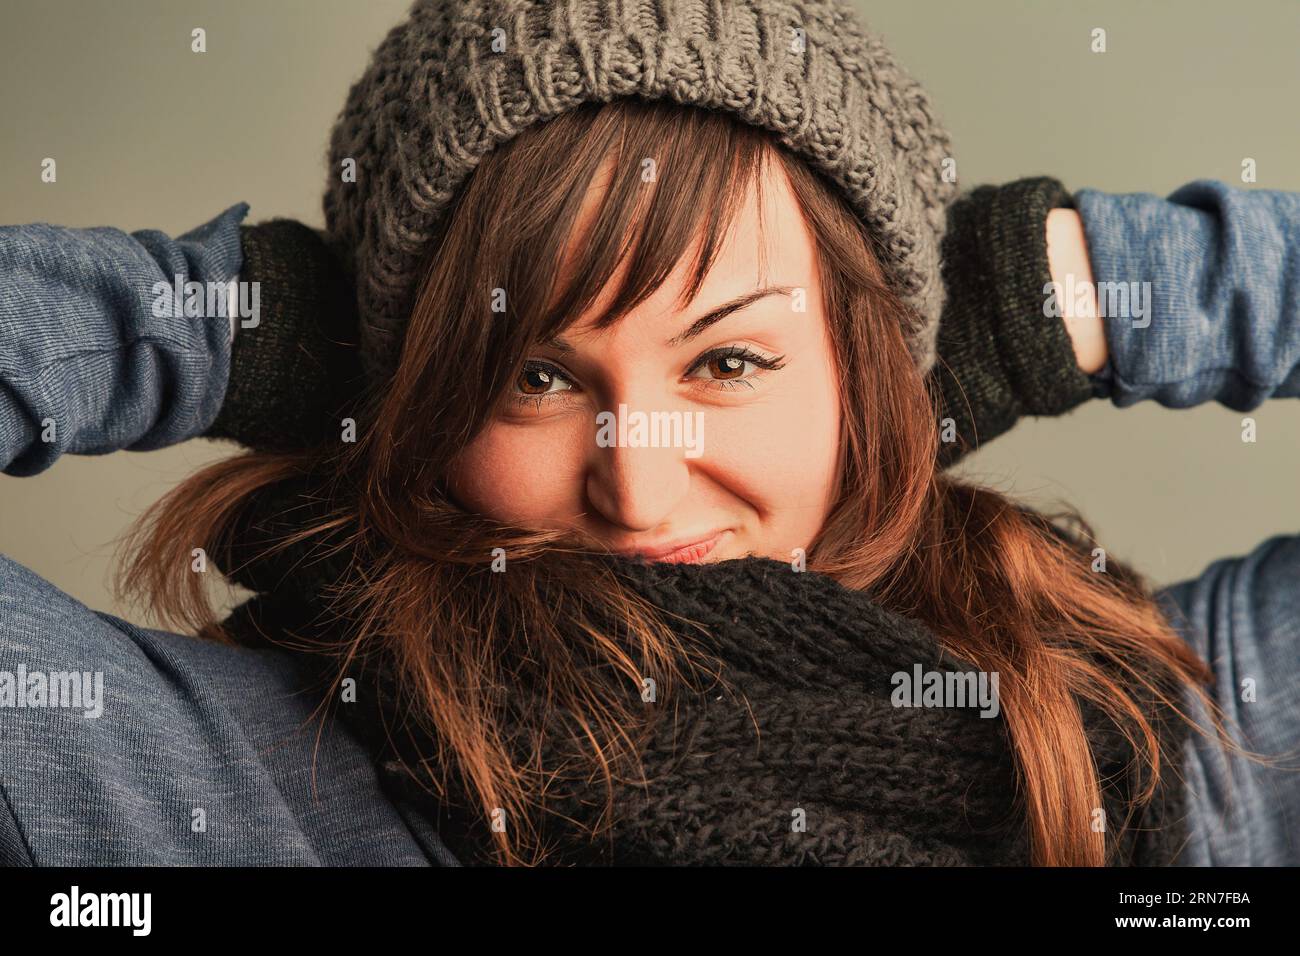 woman with shimmering eyes and flowing brunette hair is comforted and stylish in her winter wear, decked in woolens Stock Photo